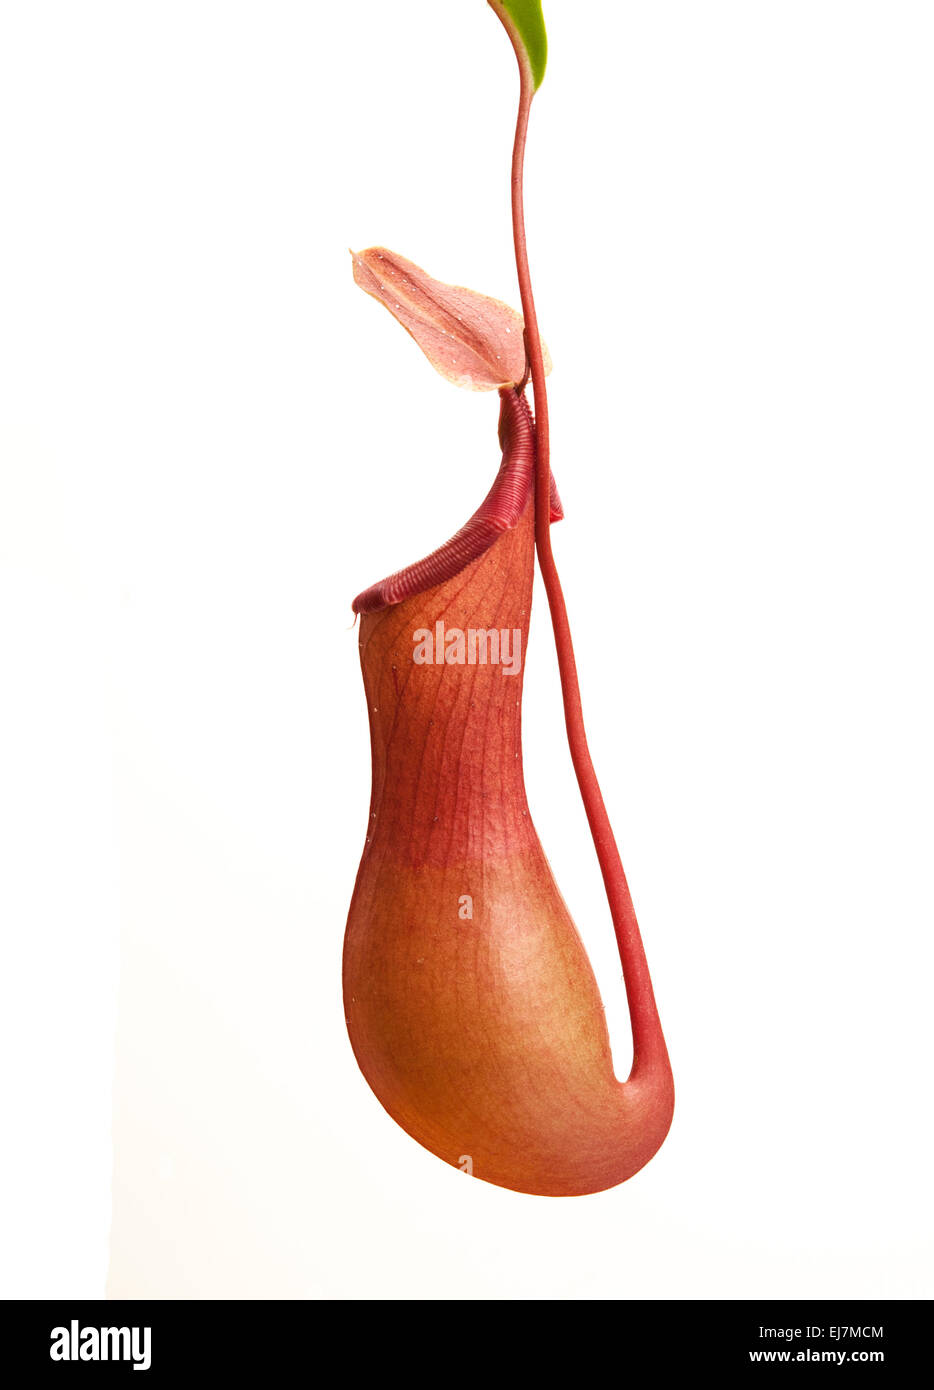 Pitcher Plant: Nepenthes alata. On white background Stock Photo